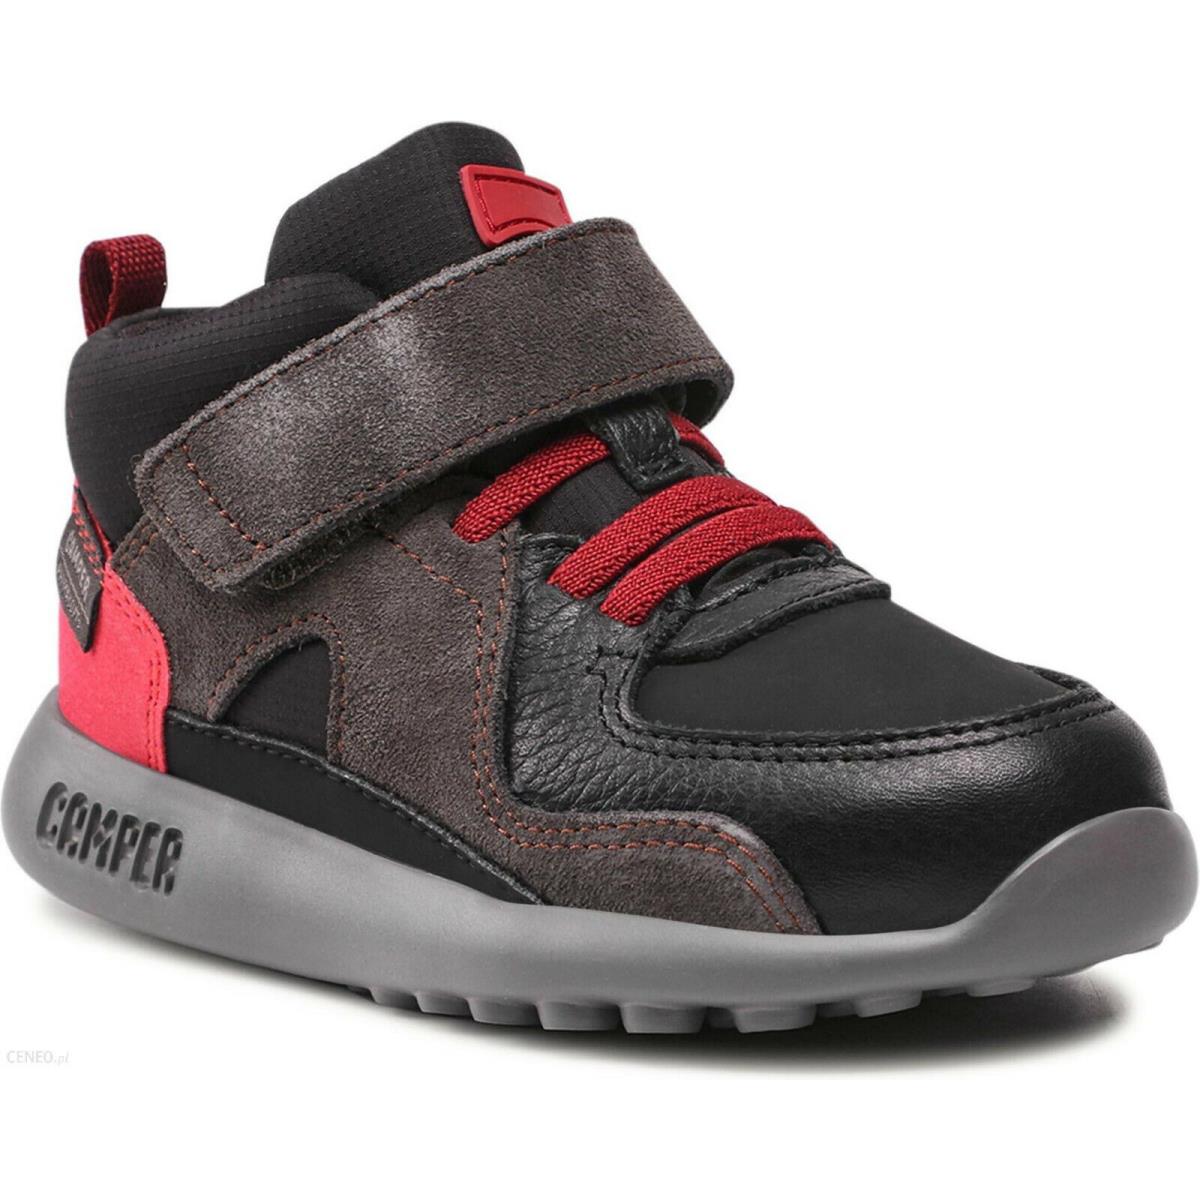 Boys Camper Driftie Ankle Sneaker Black Red Insulated Shoes - Black